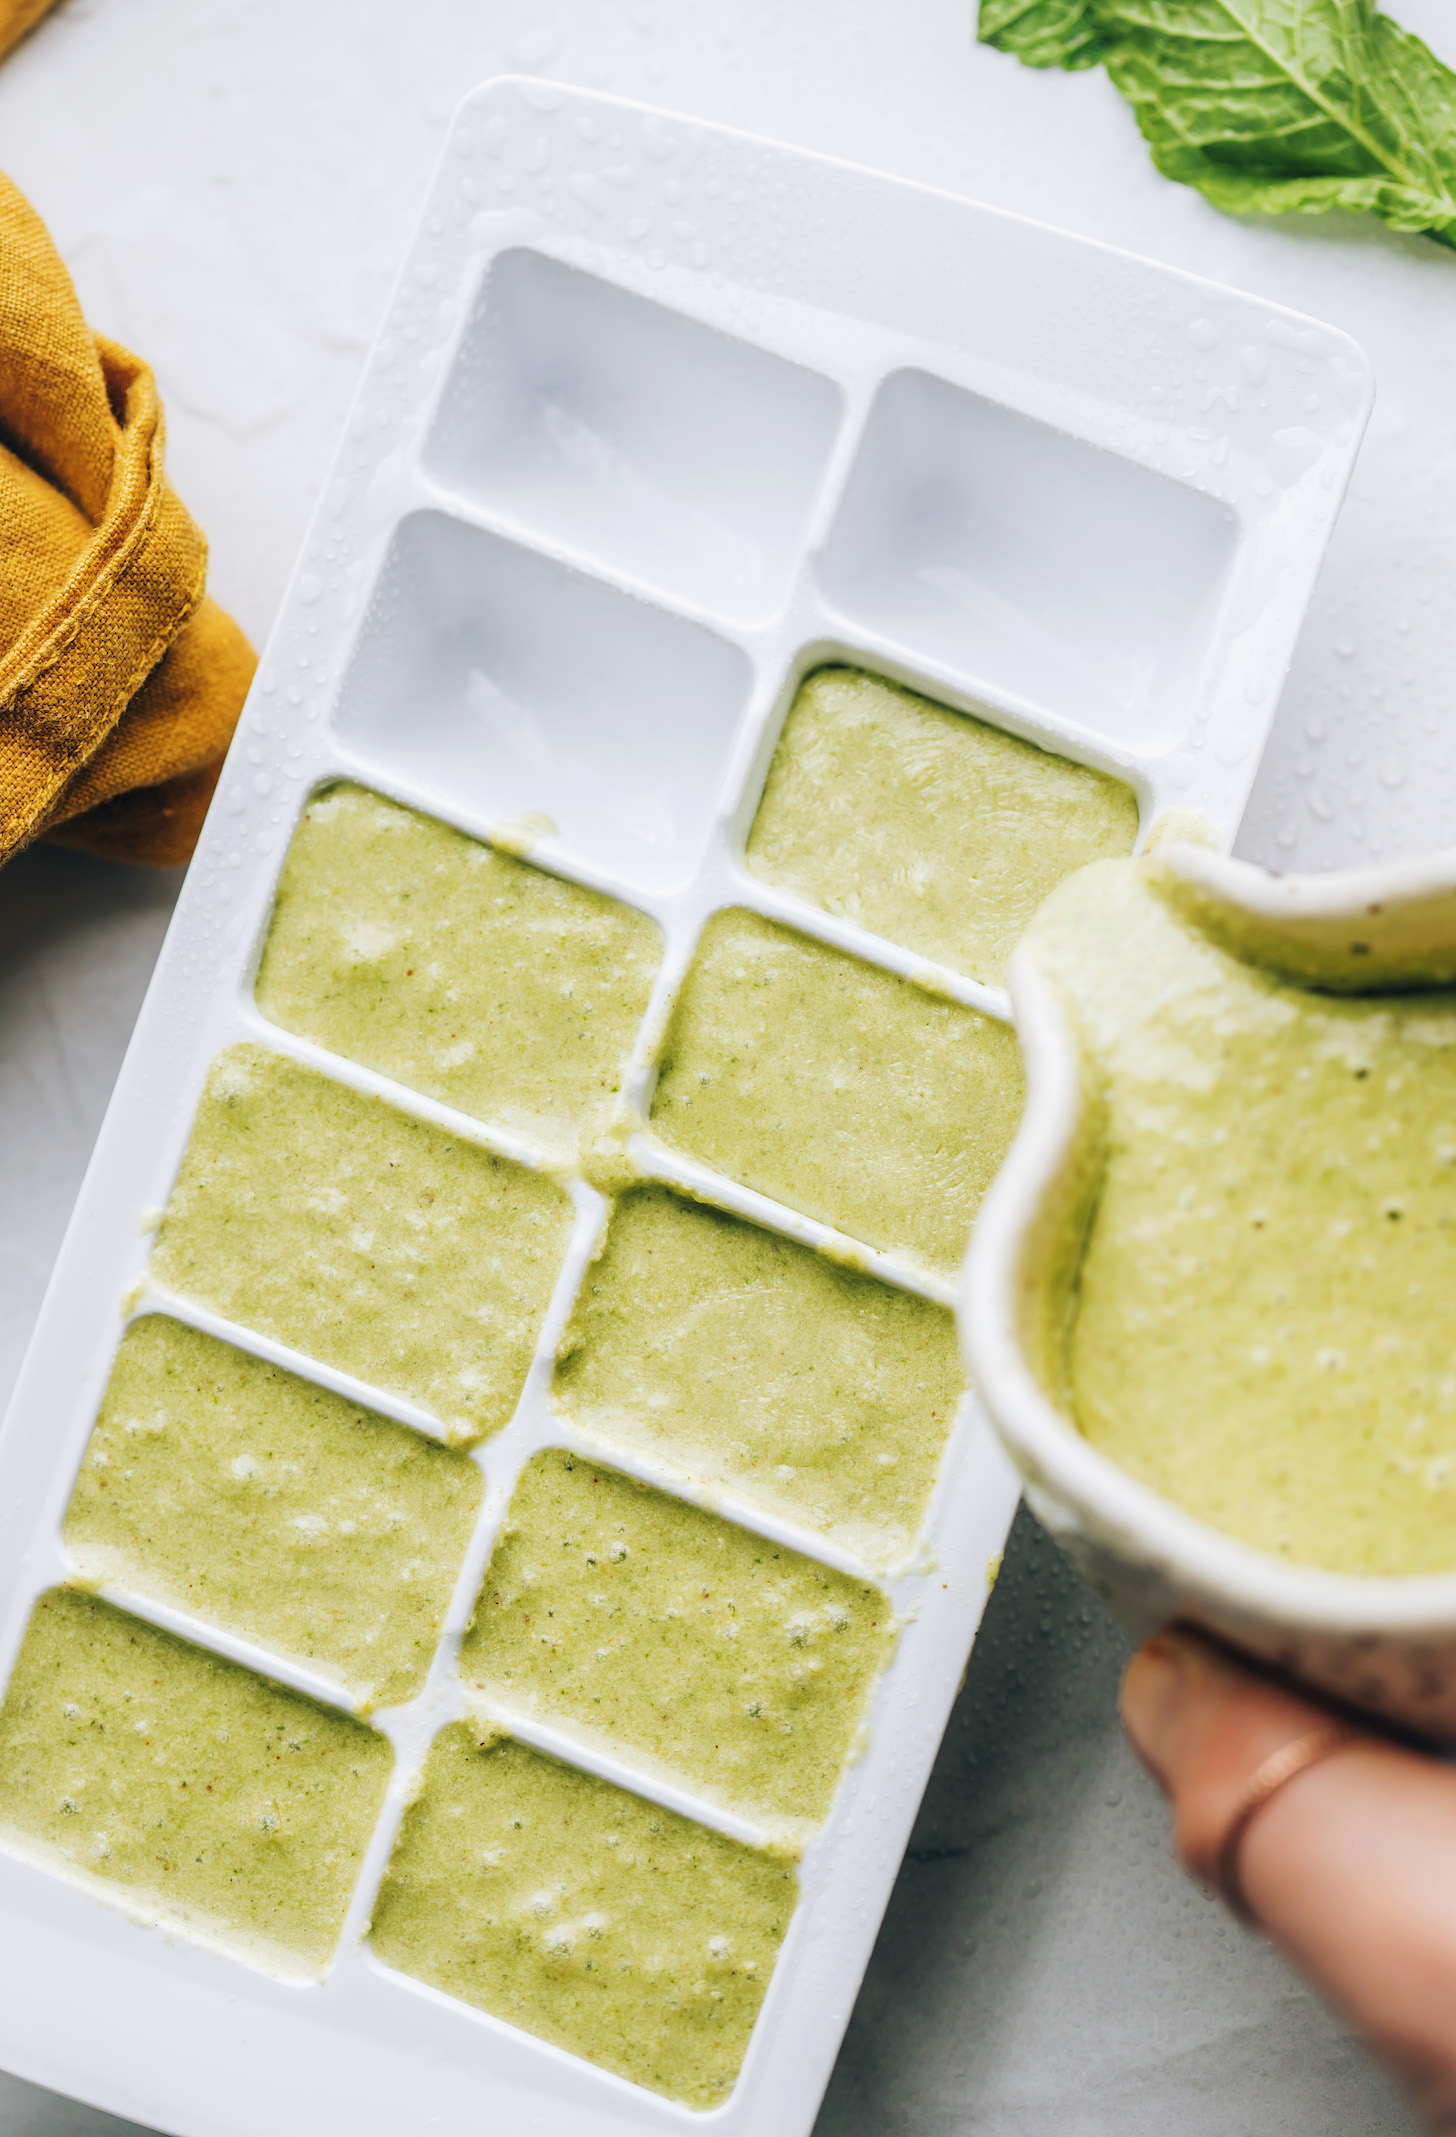 Blended mint chocolate soft serve ingredients being poured into an ice cube tray